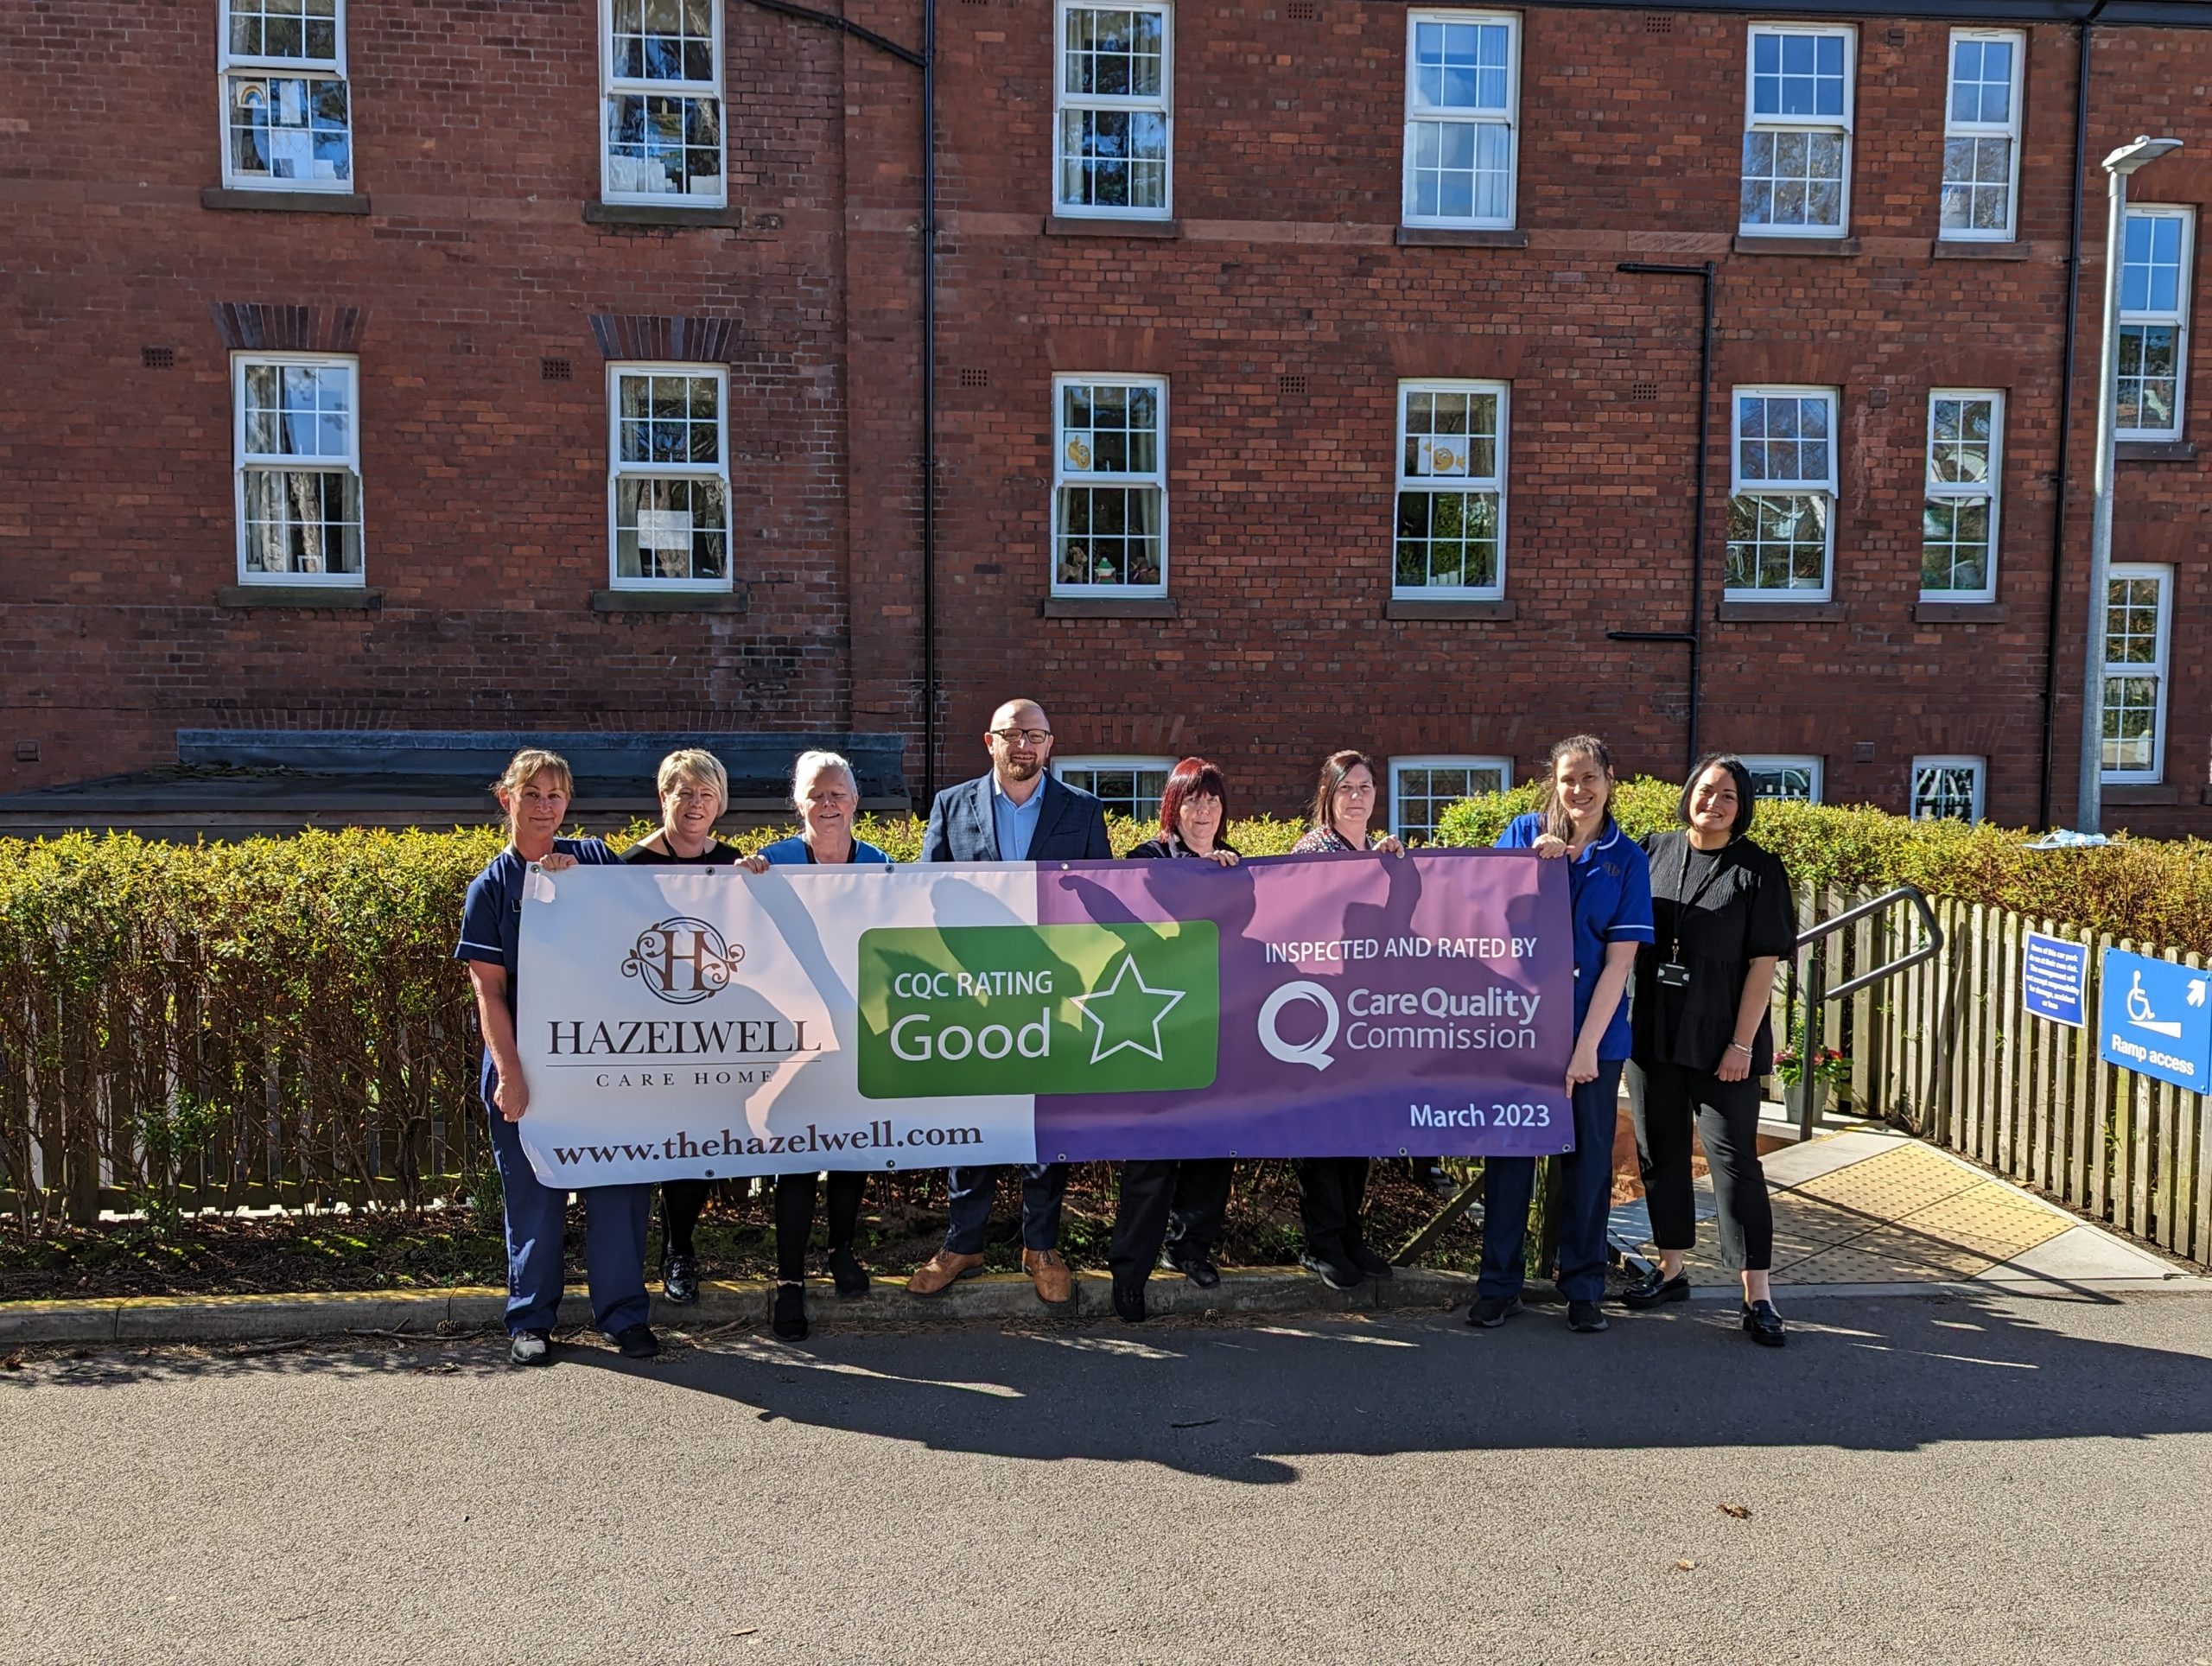 A team photo our care staff with a banner of our CQC rating at Hazelwell Care Home